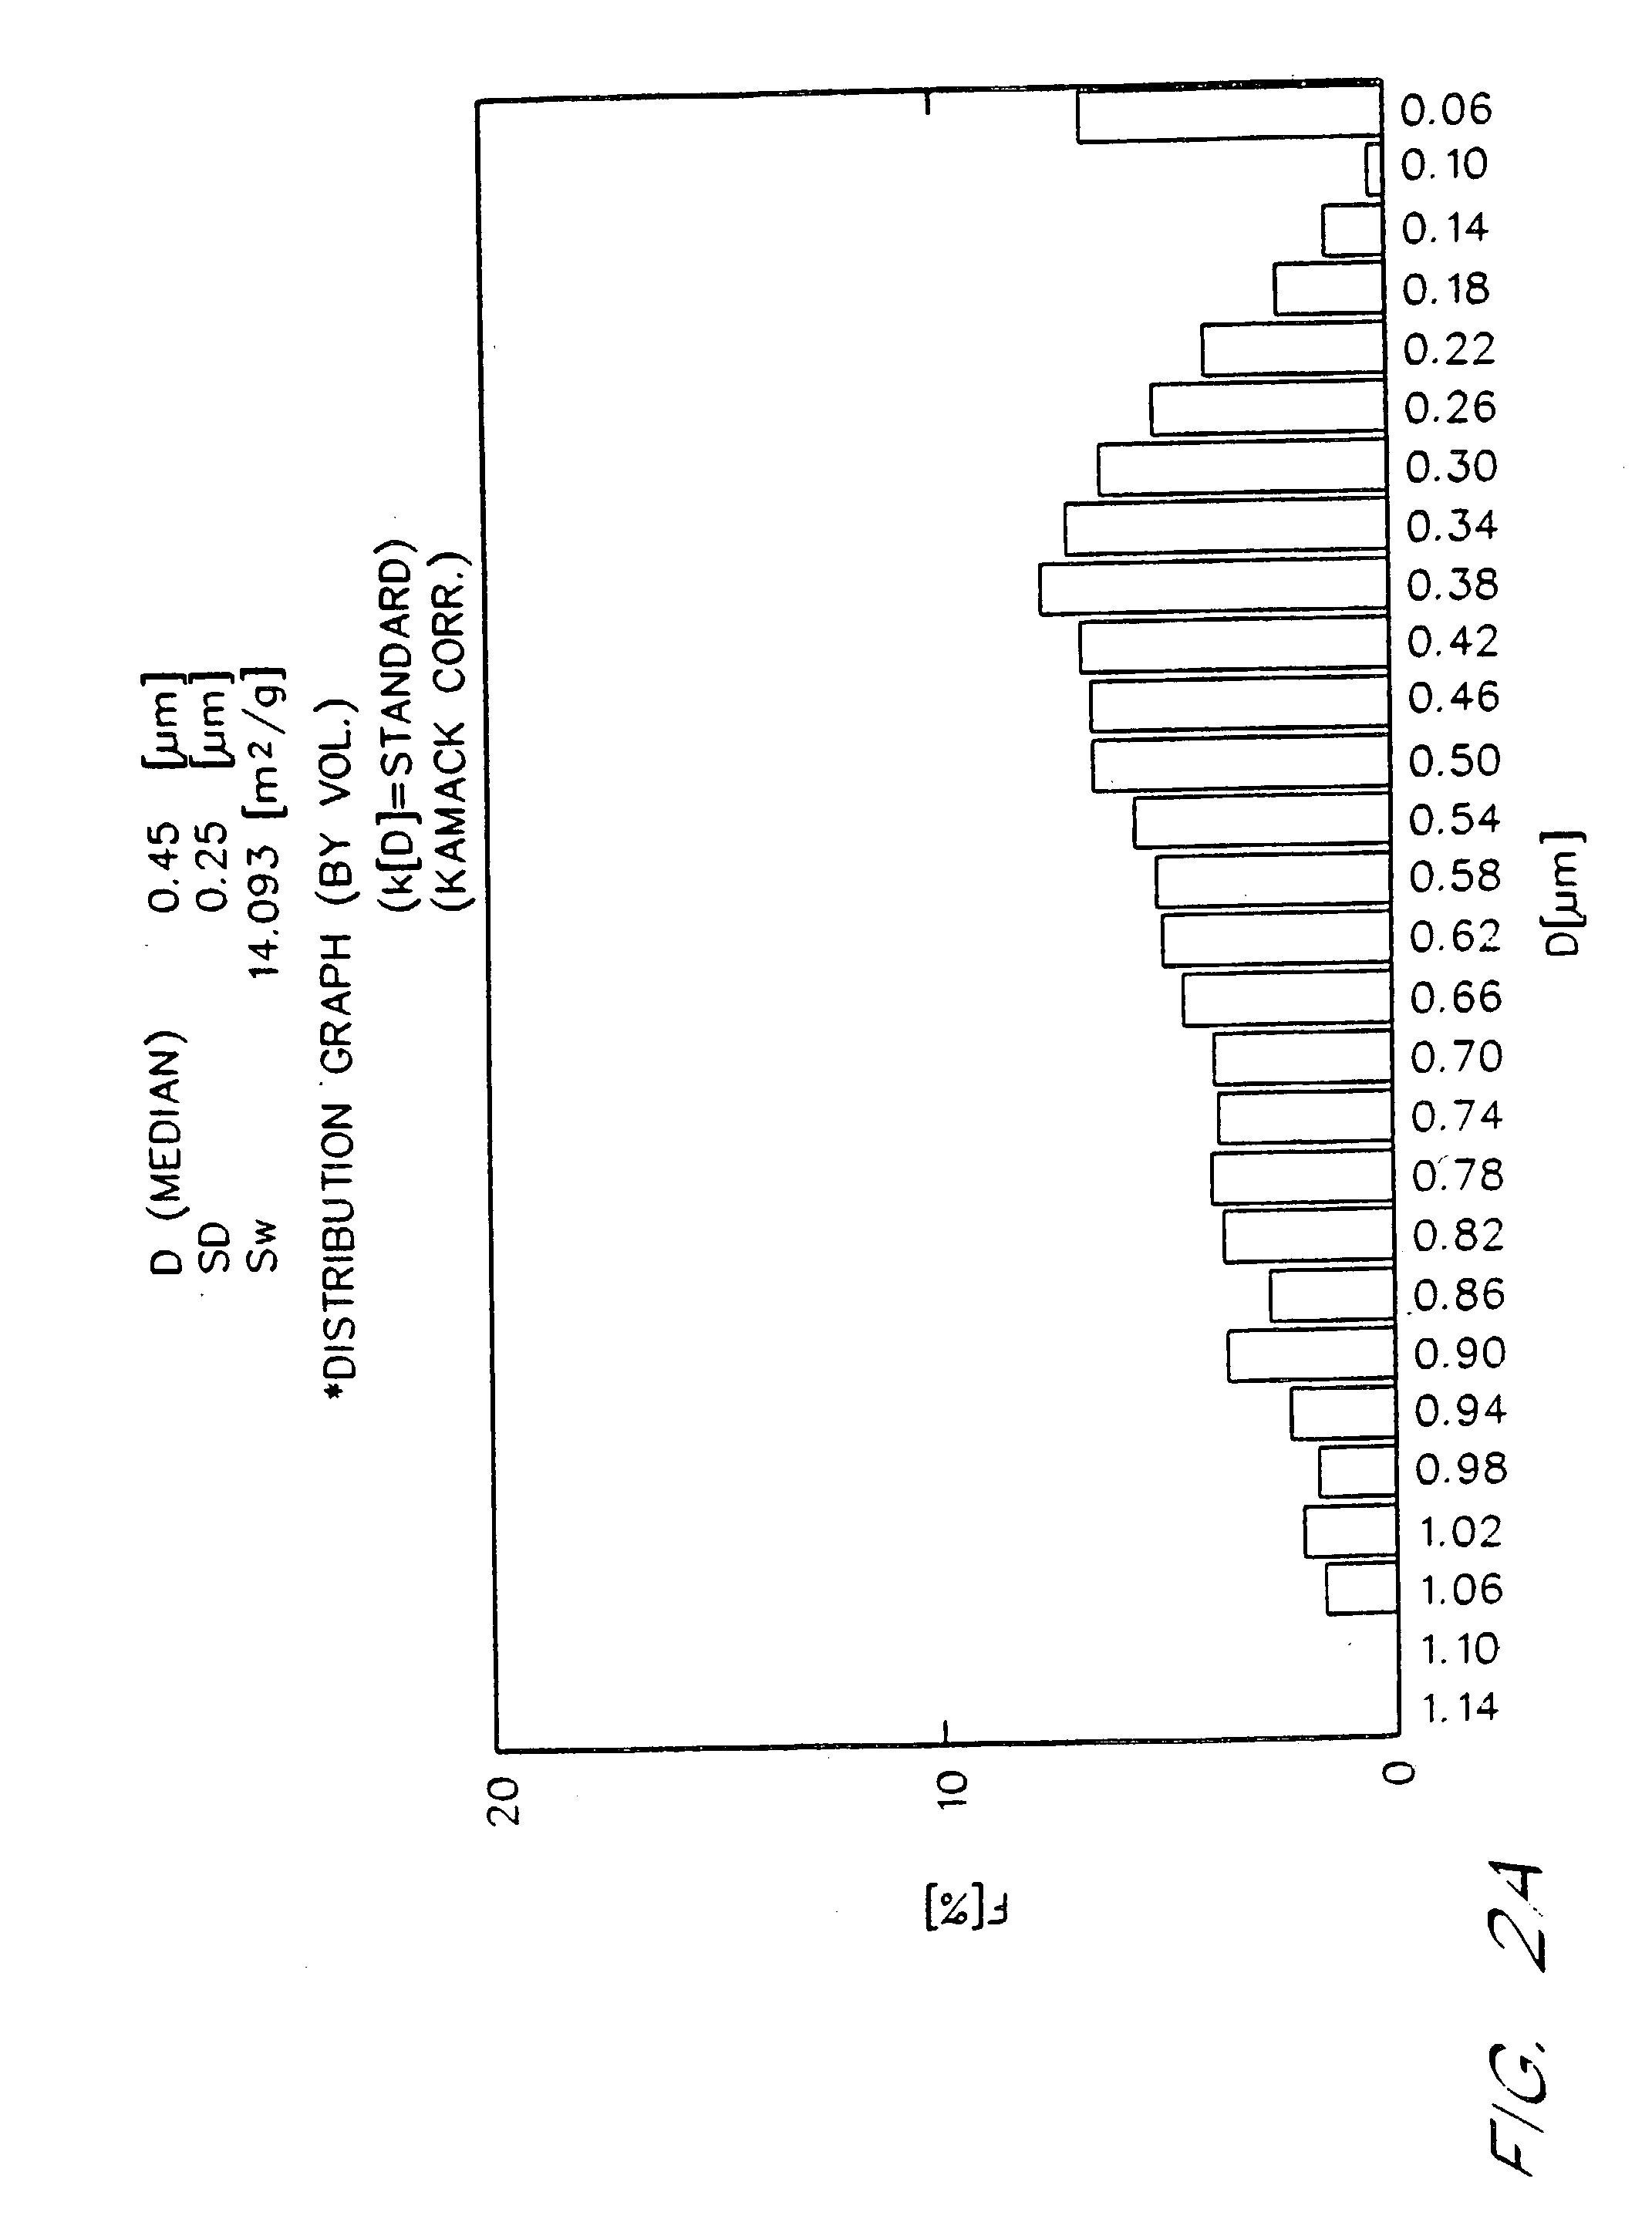 Patient oxygenation using stabilized fluorocarbon emulsions